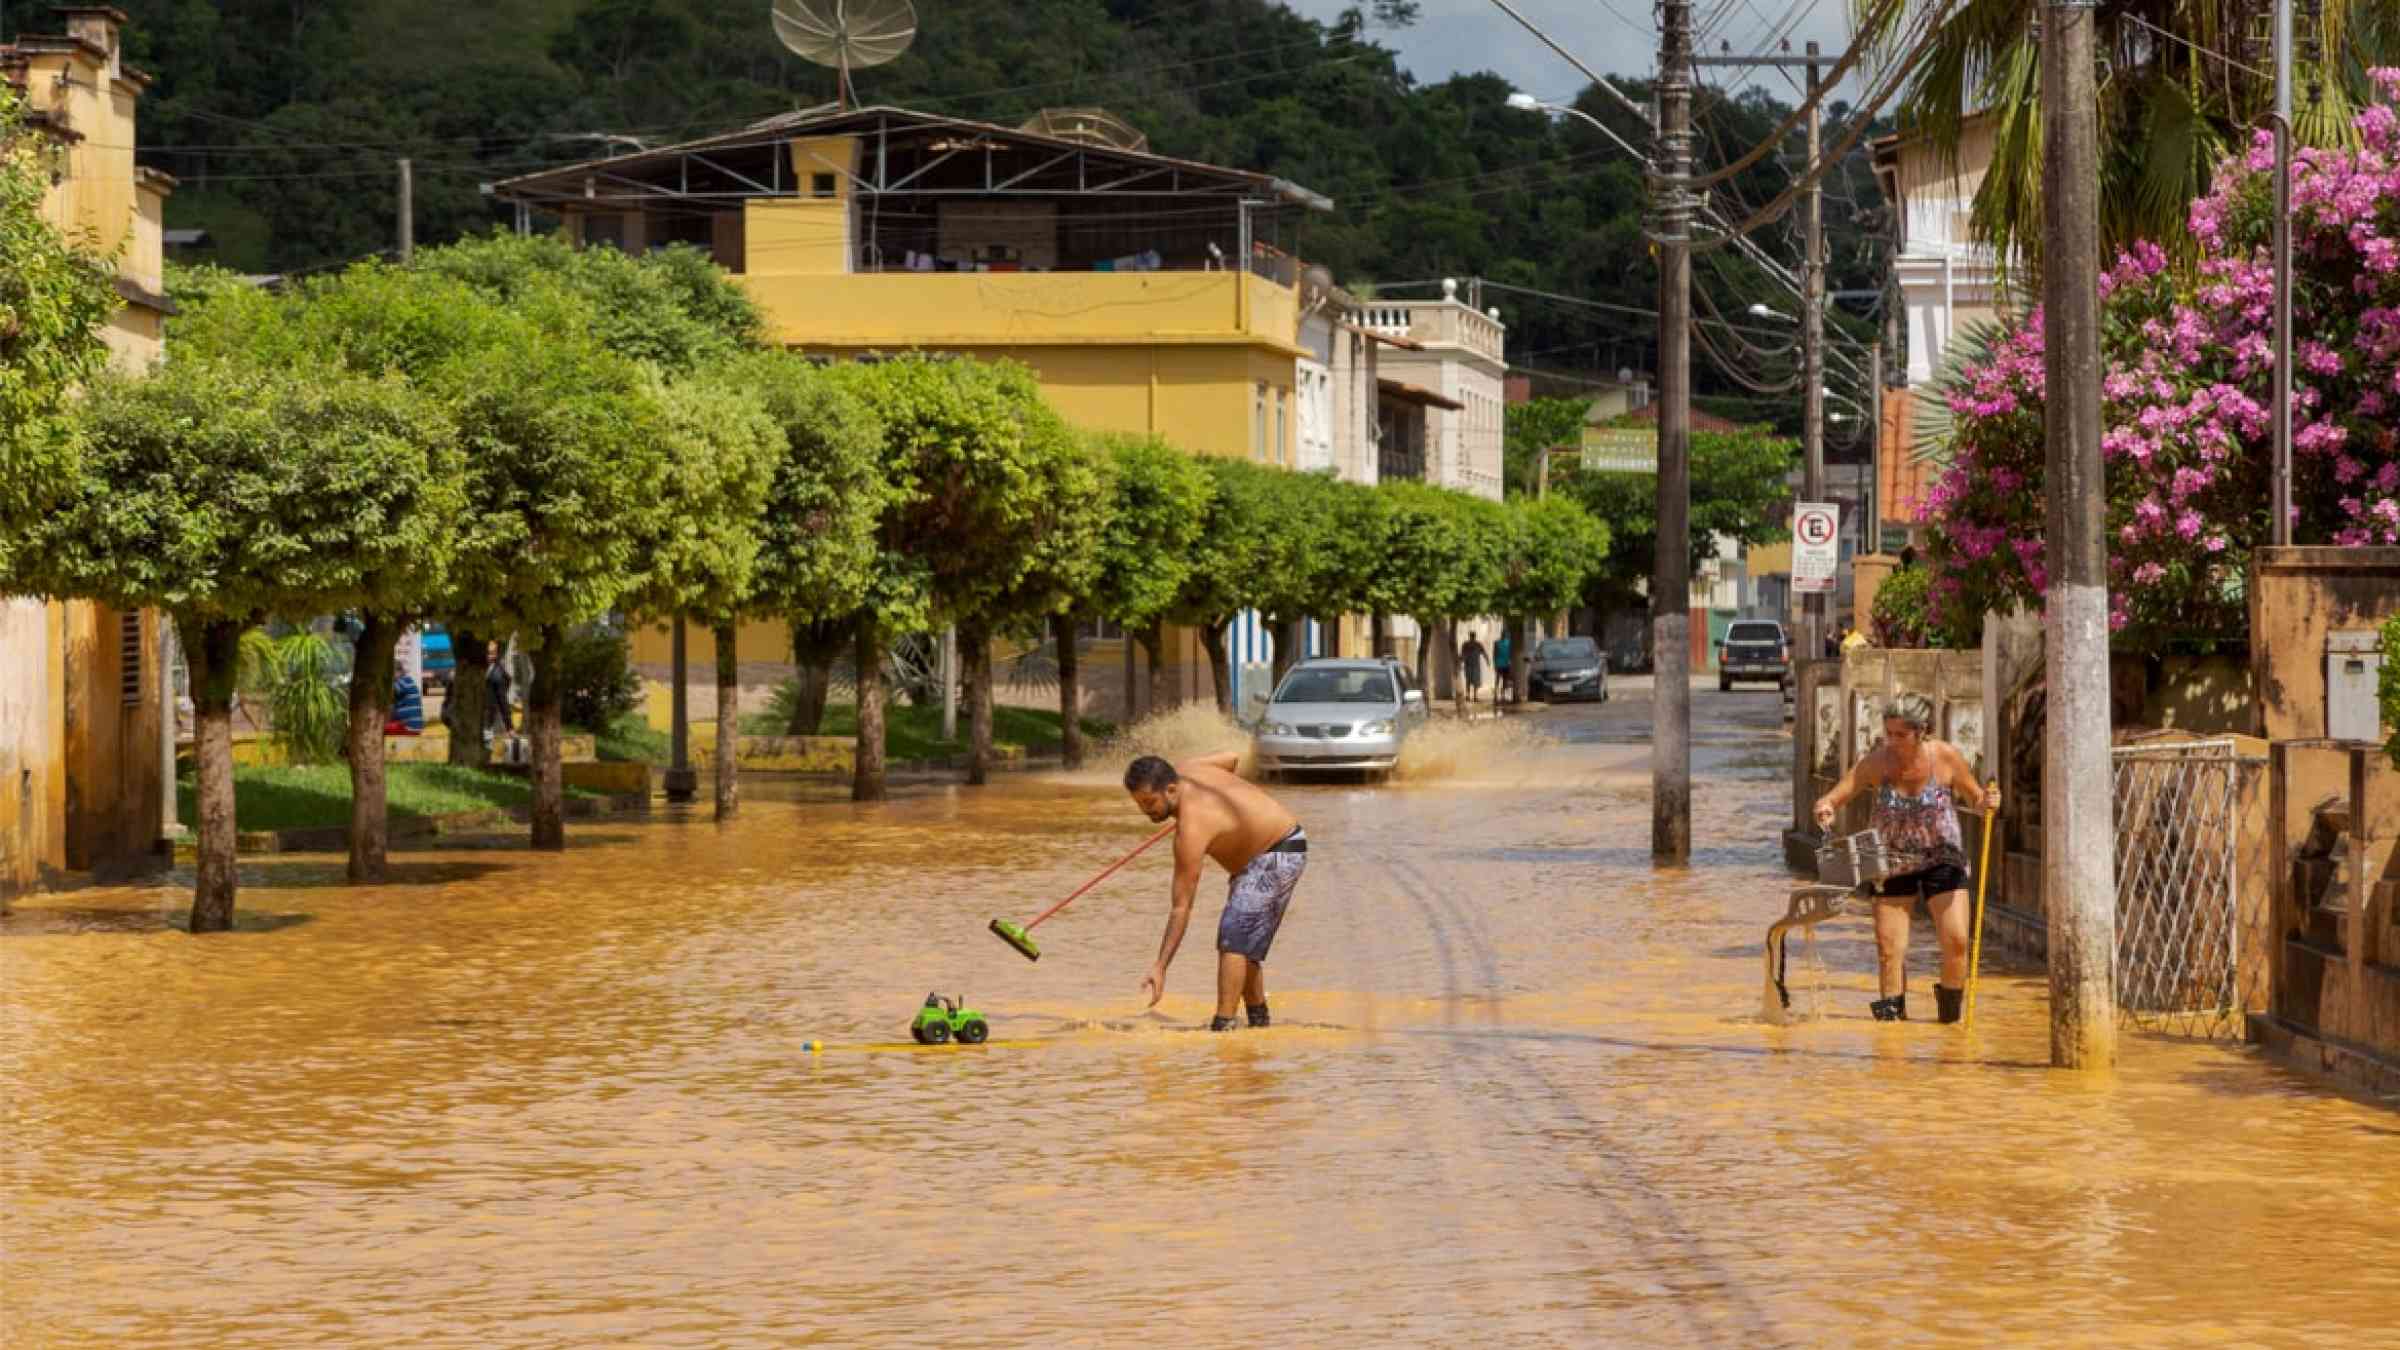 Man removes a toy in the flood water of the Pomba River, in a flooded street in the center of the city of Guarani, state of Minas Gerais, Brazil (2020)